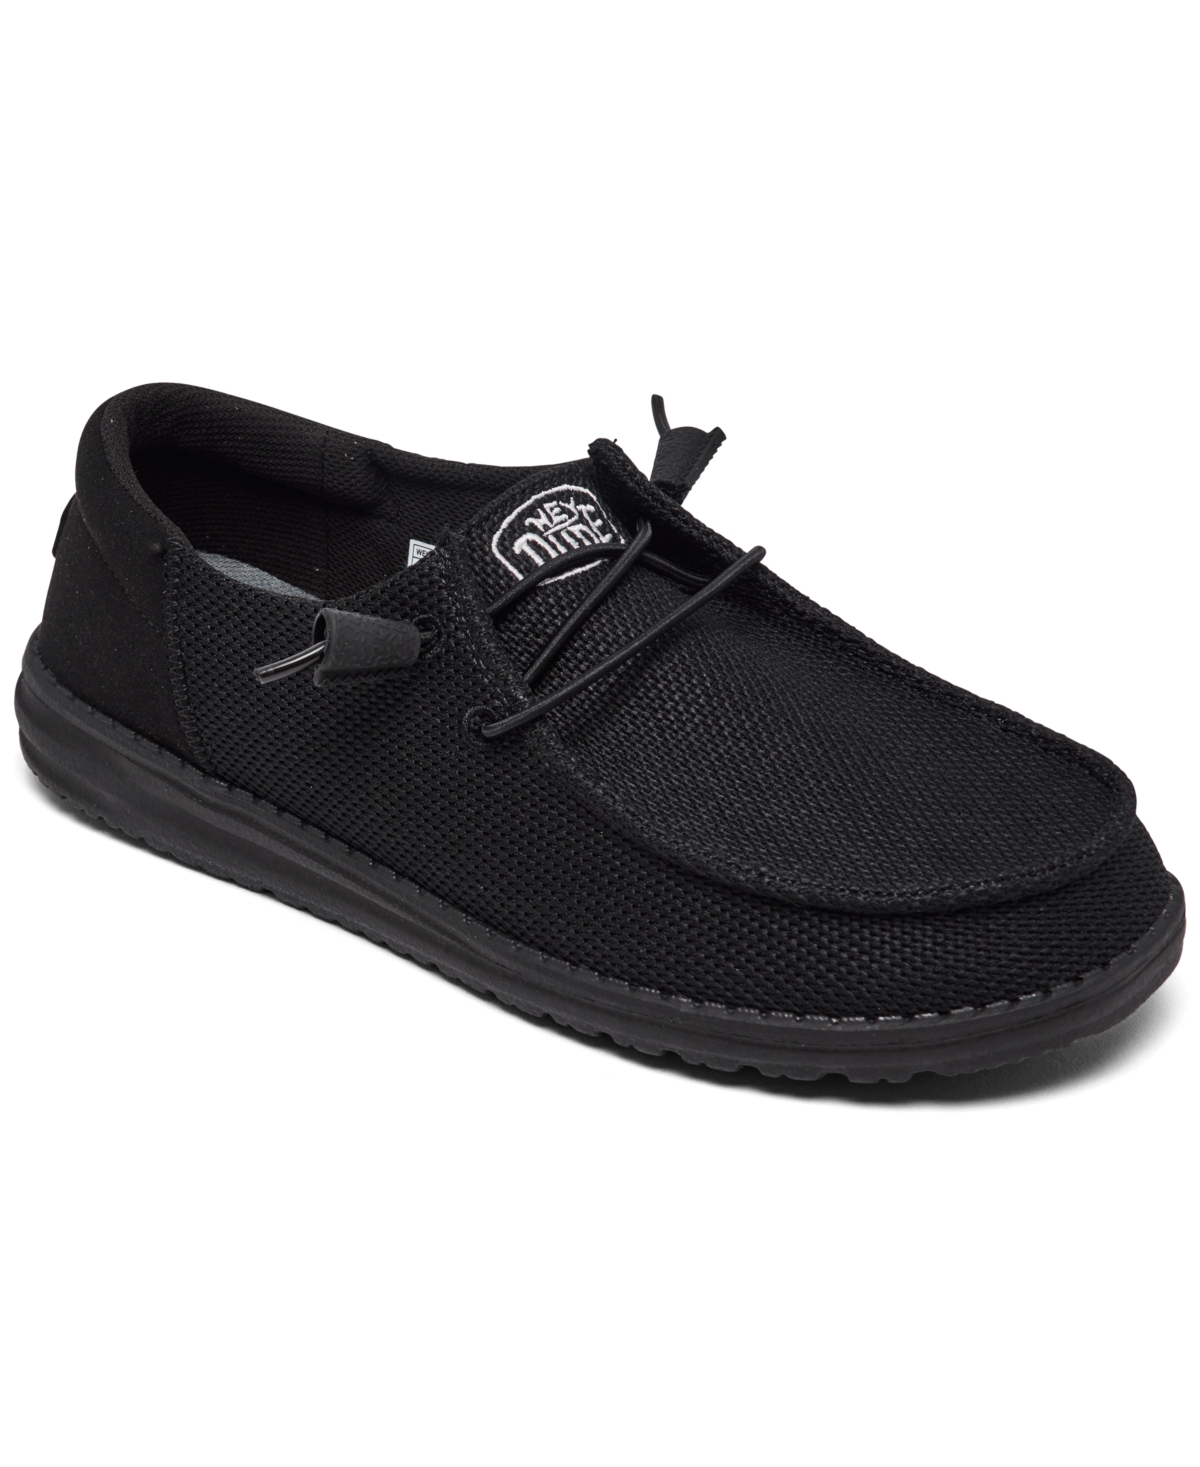 Women's Wendy Funk Mono Casual Moccasin Sneakers from Finish Line - Black